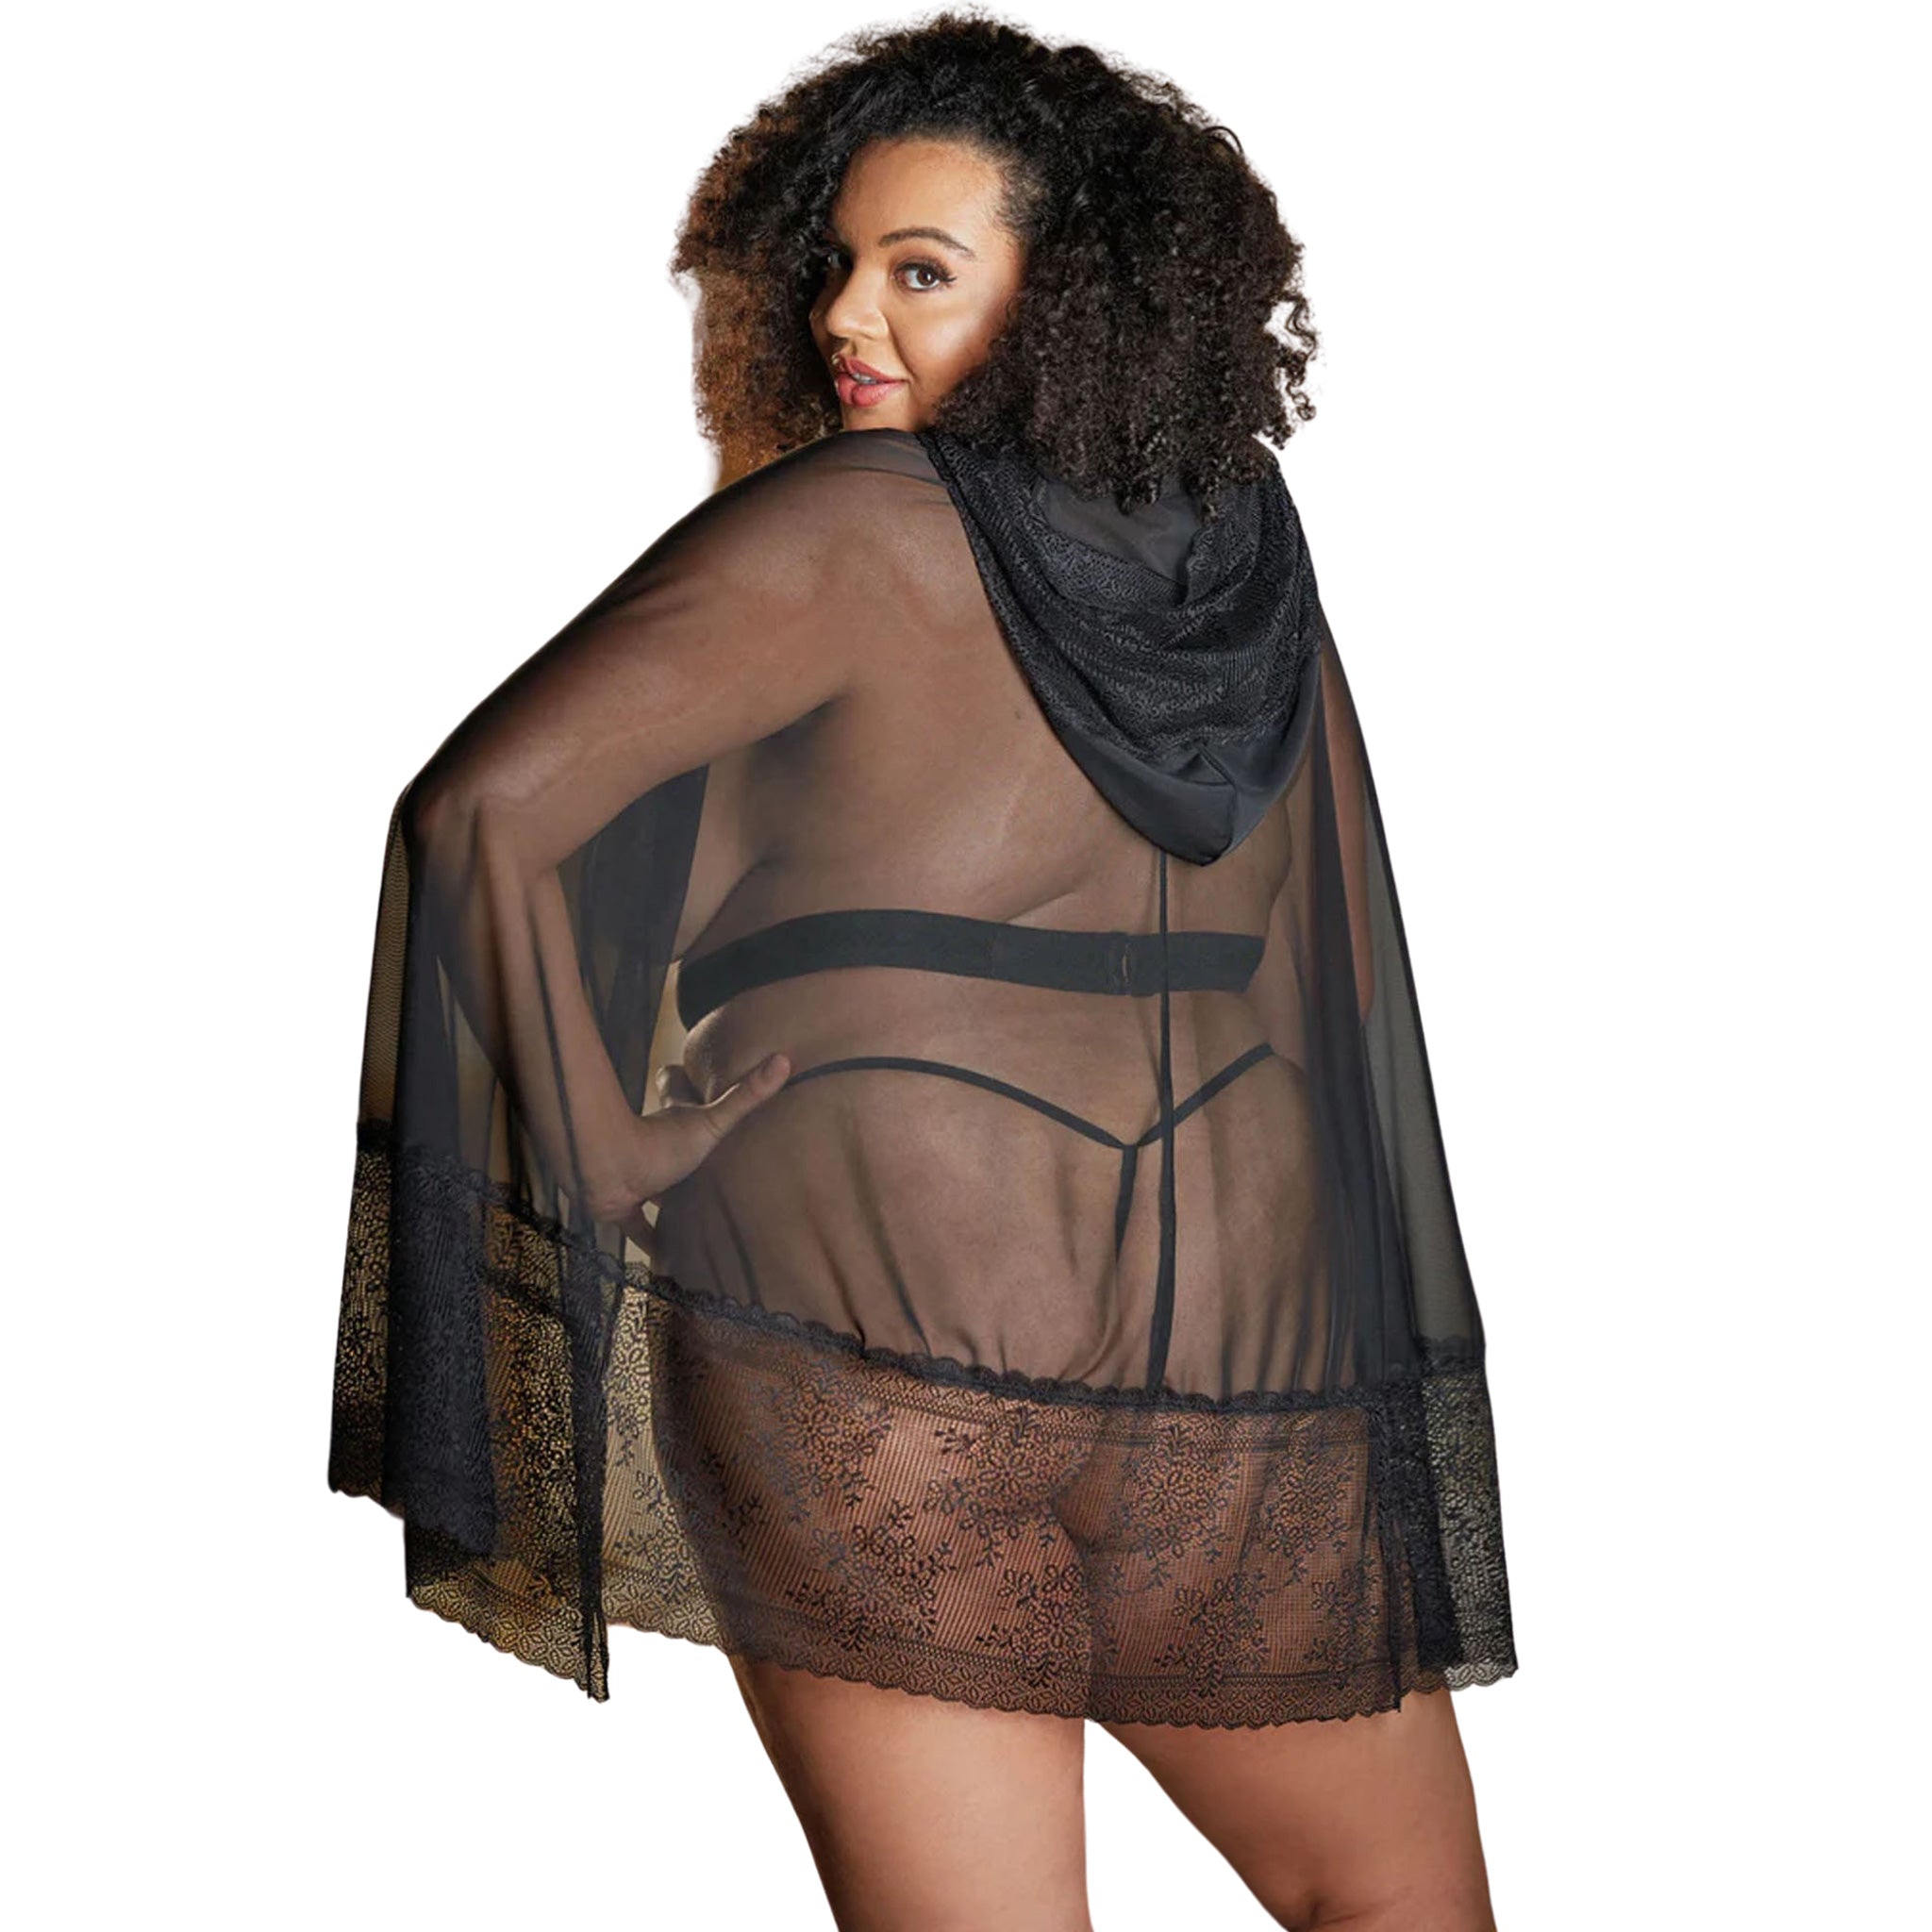 Lace and Mesh Lingerie Cape With Waist Belt O/S Curvy